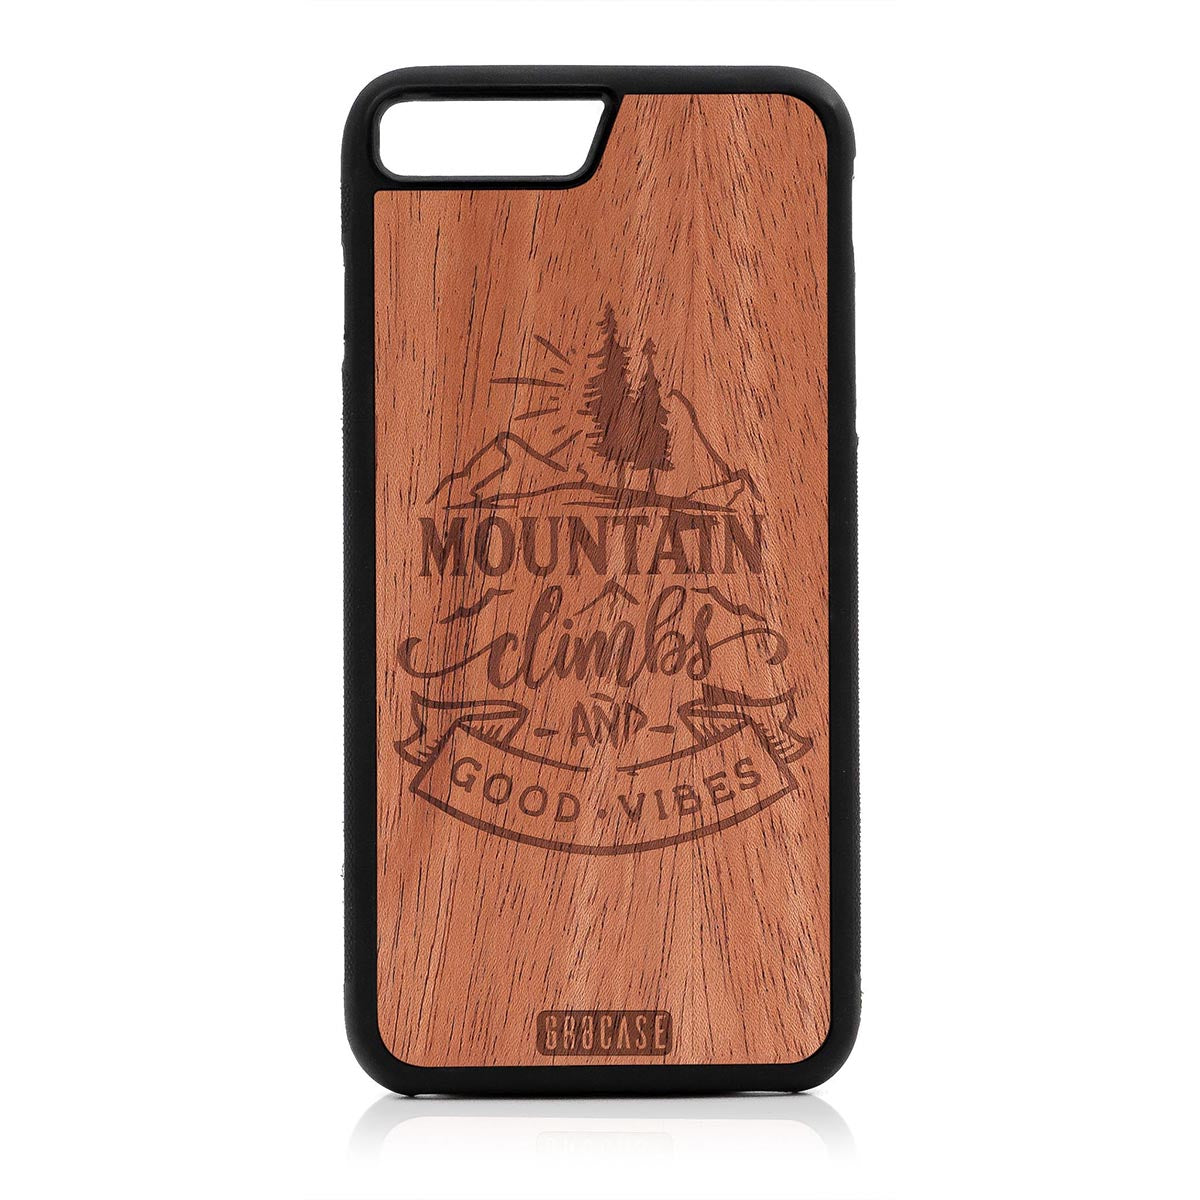 Mountain Climbs And Good Vibes Design Wood Case For iPhone 7 Plus / 8 Plus by GR8CASE